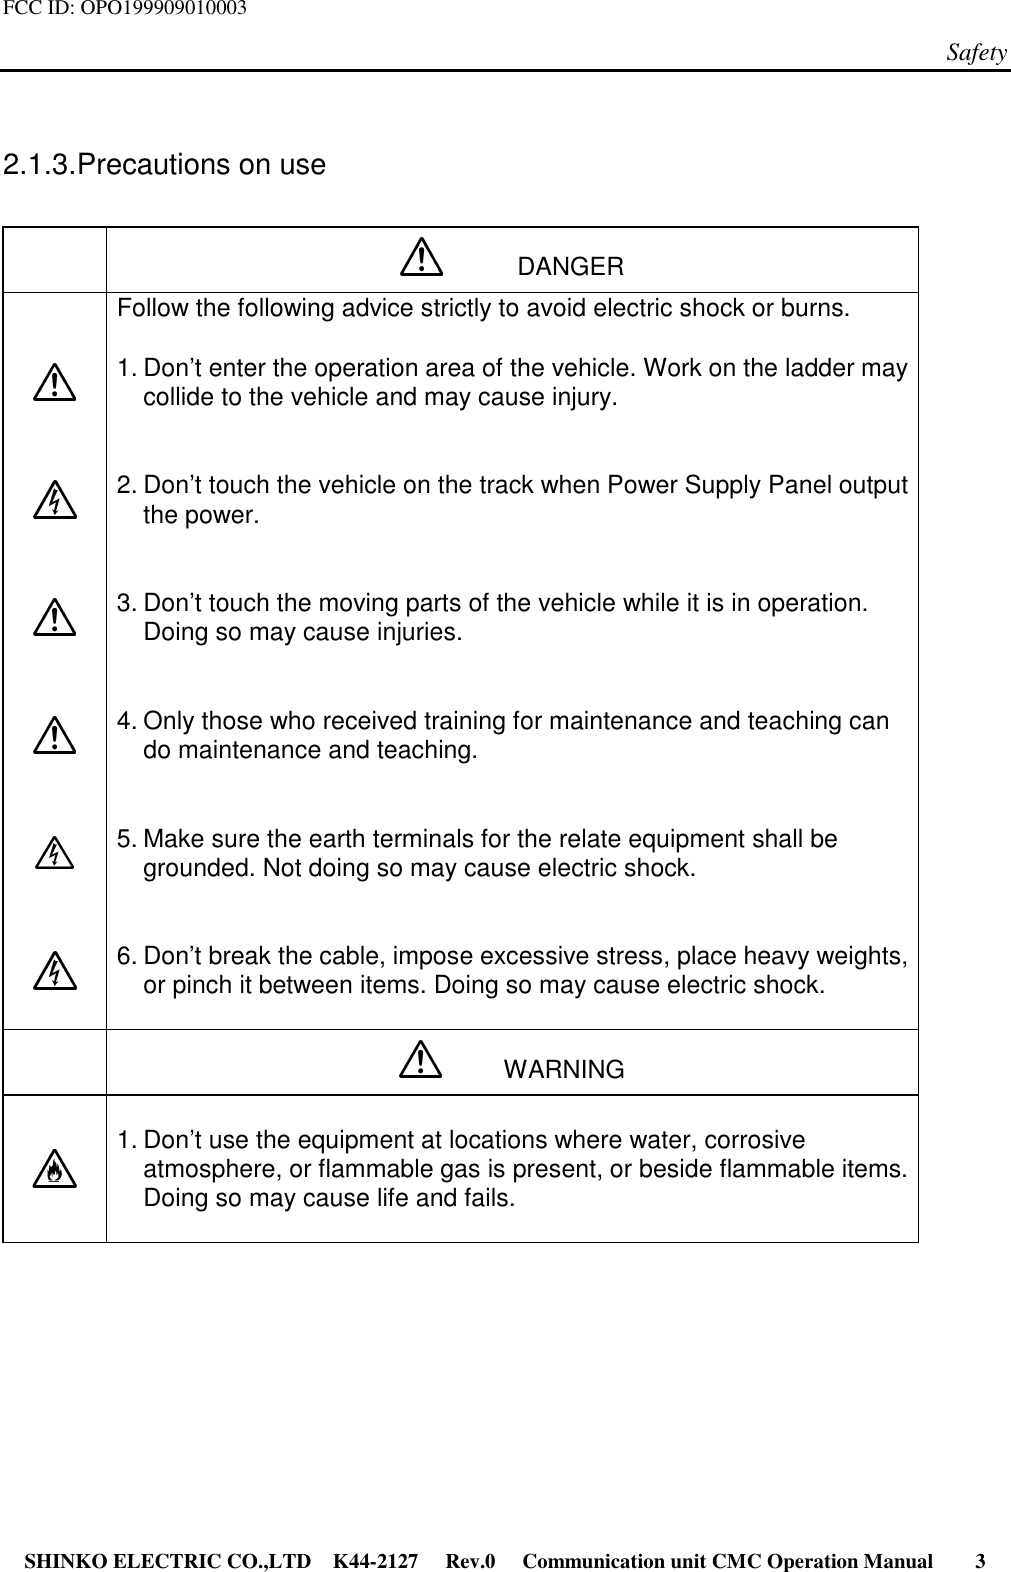 FCC ID: OPO199909010003Safety SHINKO ELECTRIC CO.,LTD K44-2127   Rev.0   Communication unit CMC Operation Manual     32.1.3. Precautions on use      DANGERFollow the following advice strictly to avoid electric shock or burns.1. Don’t enter the operation area of the vehicle. Work on the ladder maycollide to the vehicle and may cause injury.2. Don’t touch the vehicle on the track when Power Supply Panel outputthe power.3. Don’t touch the moving parts of the vehicle while it is in operation.Doing so may cause injuries.4. Only those who received training for maintenance and teaching cando maintenance and teaching.5. Make sure the earth terminals for the relate equipment shall begrounded. Not doing so may cause electric shock.6. Don’t break the cable, impose excessive stress, place heavy weights,or pinch it between items. Doing so may cause electric shock.     WARNING1. Don’t use the equipment at locations where water, corrosiveatmosphere, or flammable gas is present, or beside flammable items.Doing so may cause life and fails.